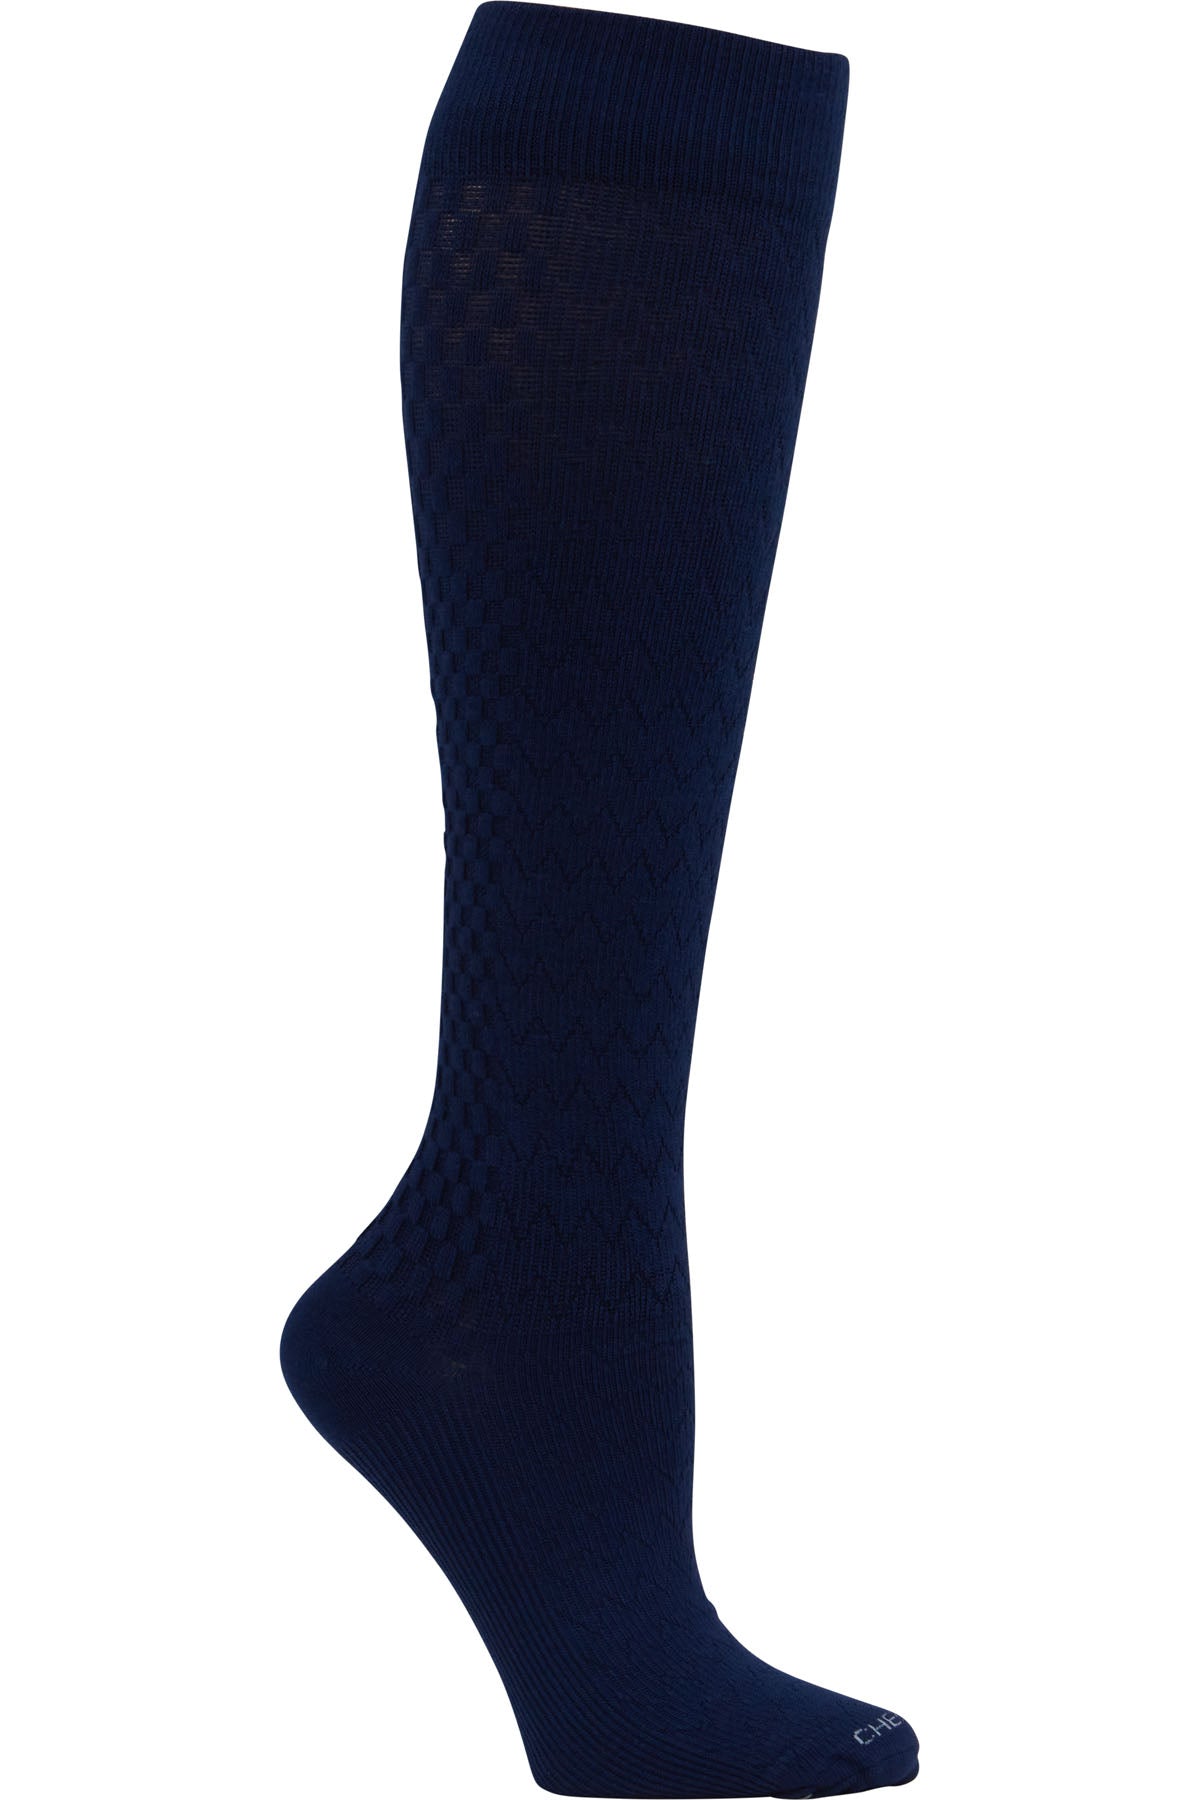 Cherokee Mild Compression Socks True Support 10-15 mmHg in Midnight at Parker's Clothing and Shoes.